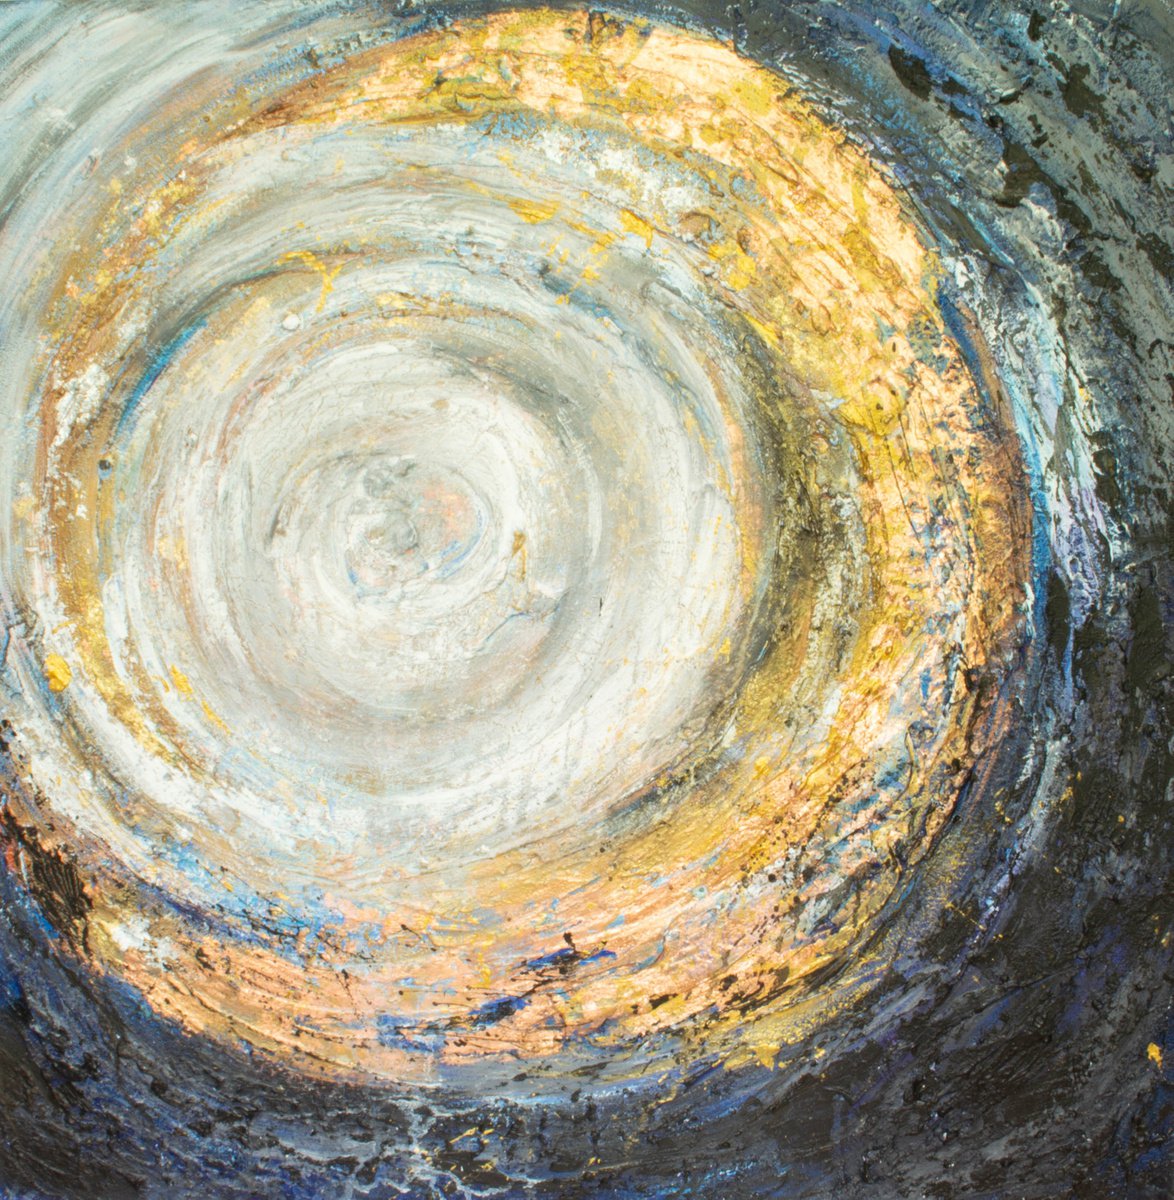 The Gold Moon Swirl by Olesia Liakhovych